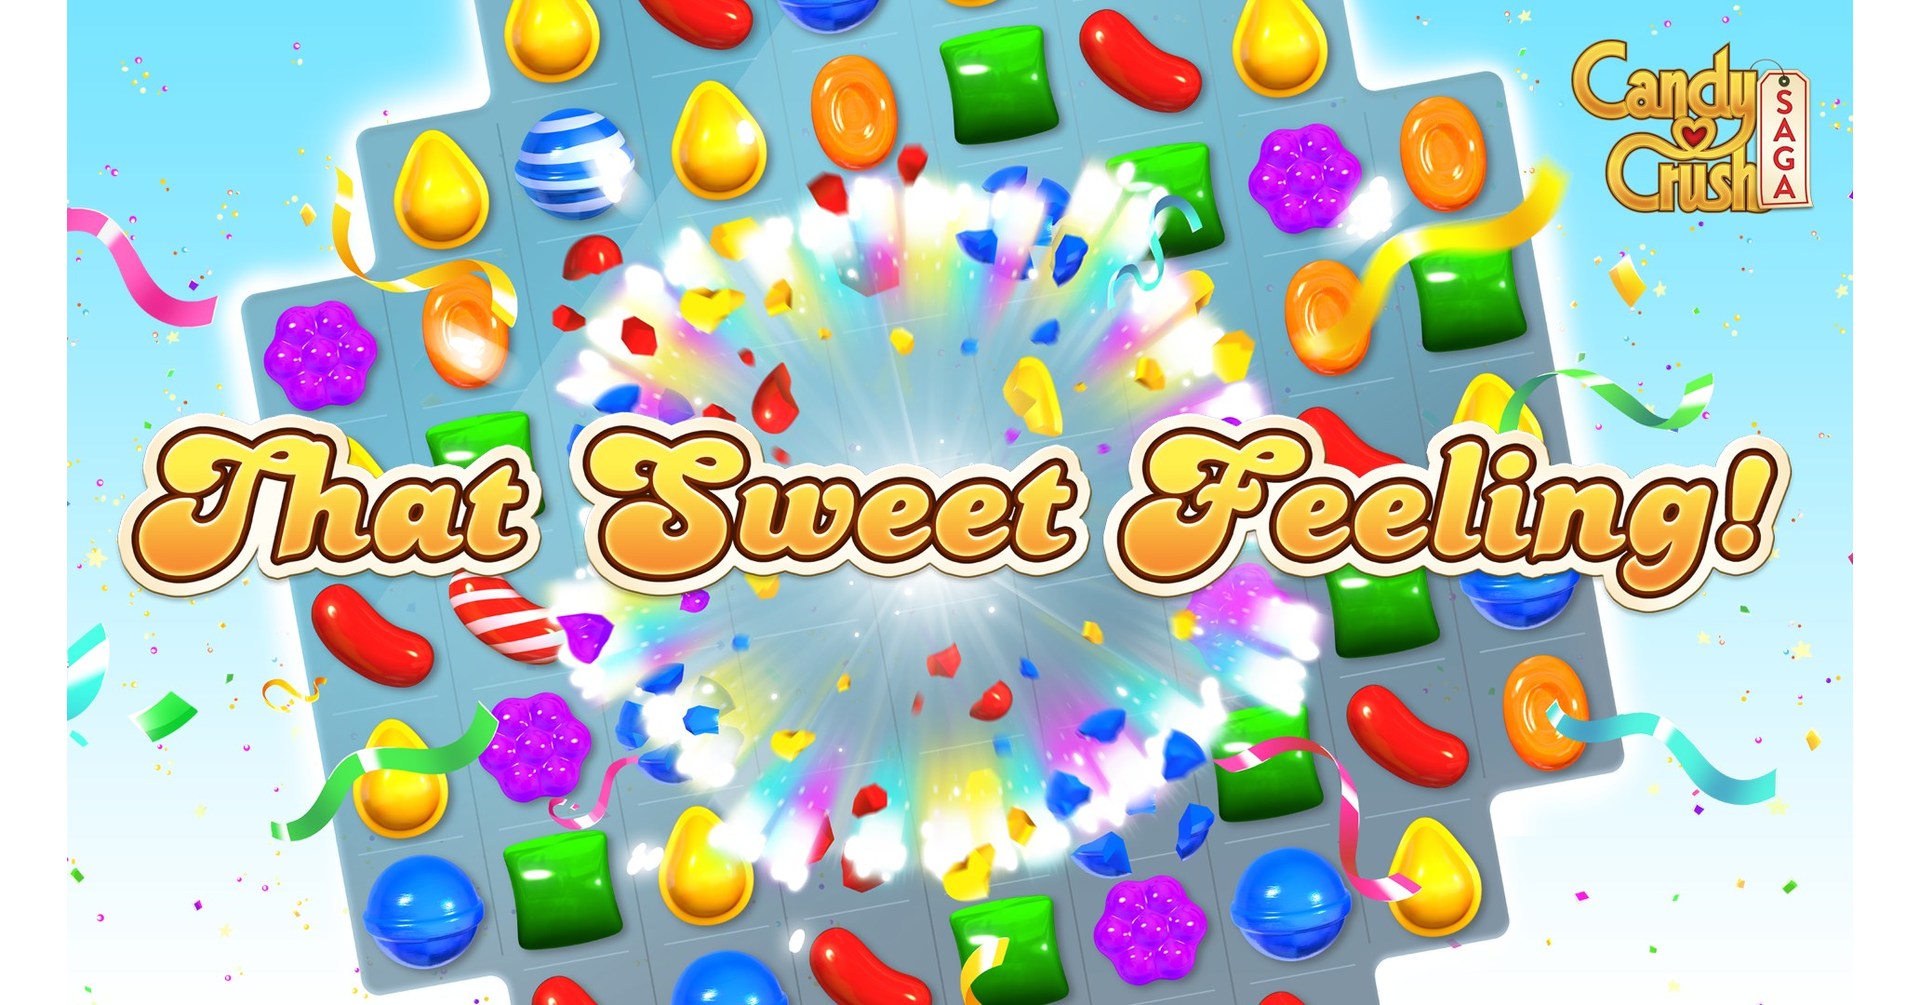 Candy Crush Saga will have you craving sweets (pictures) - CNET